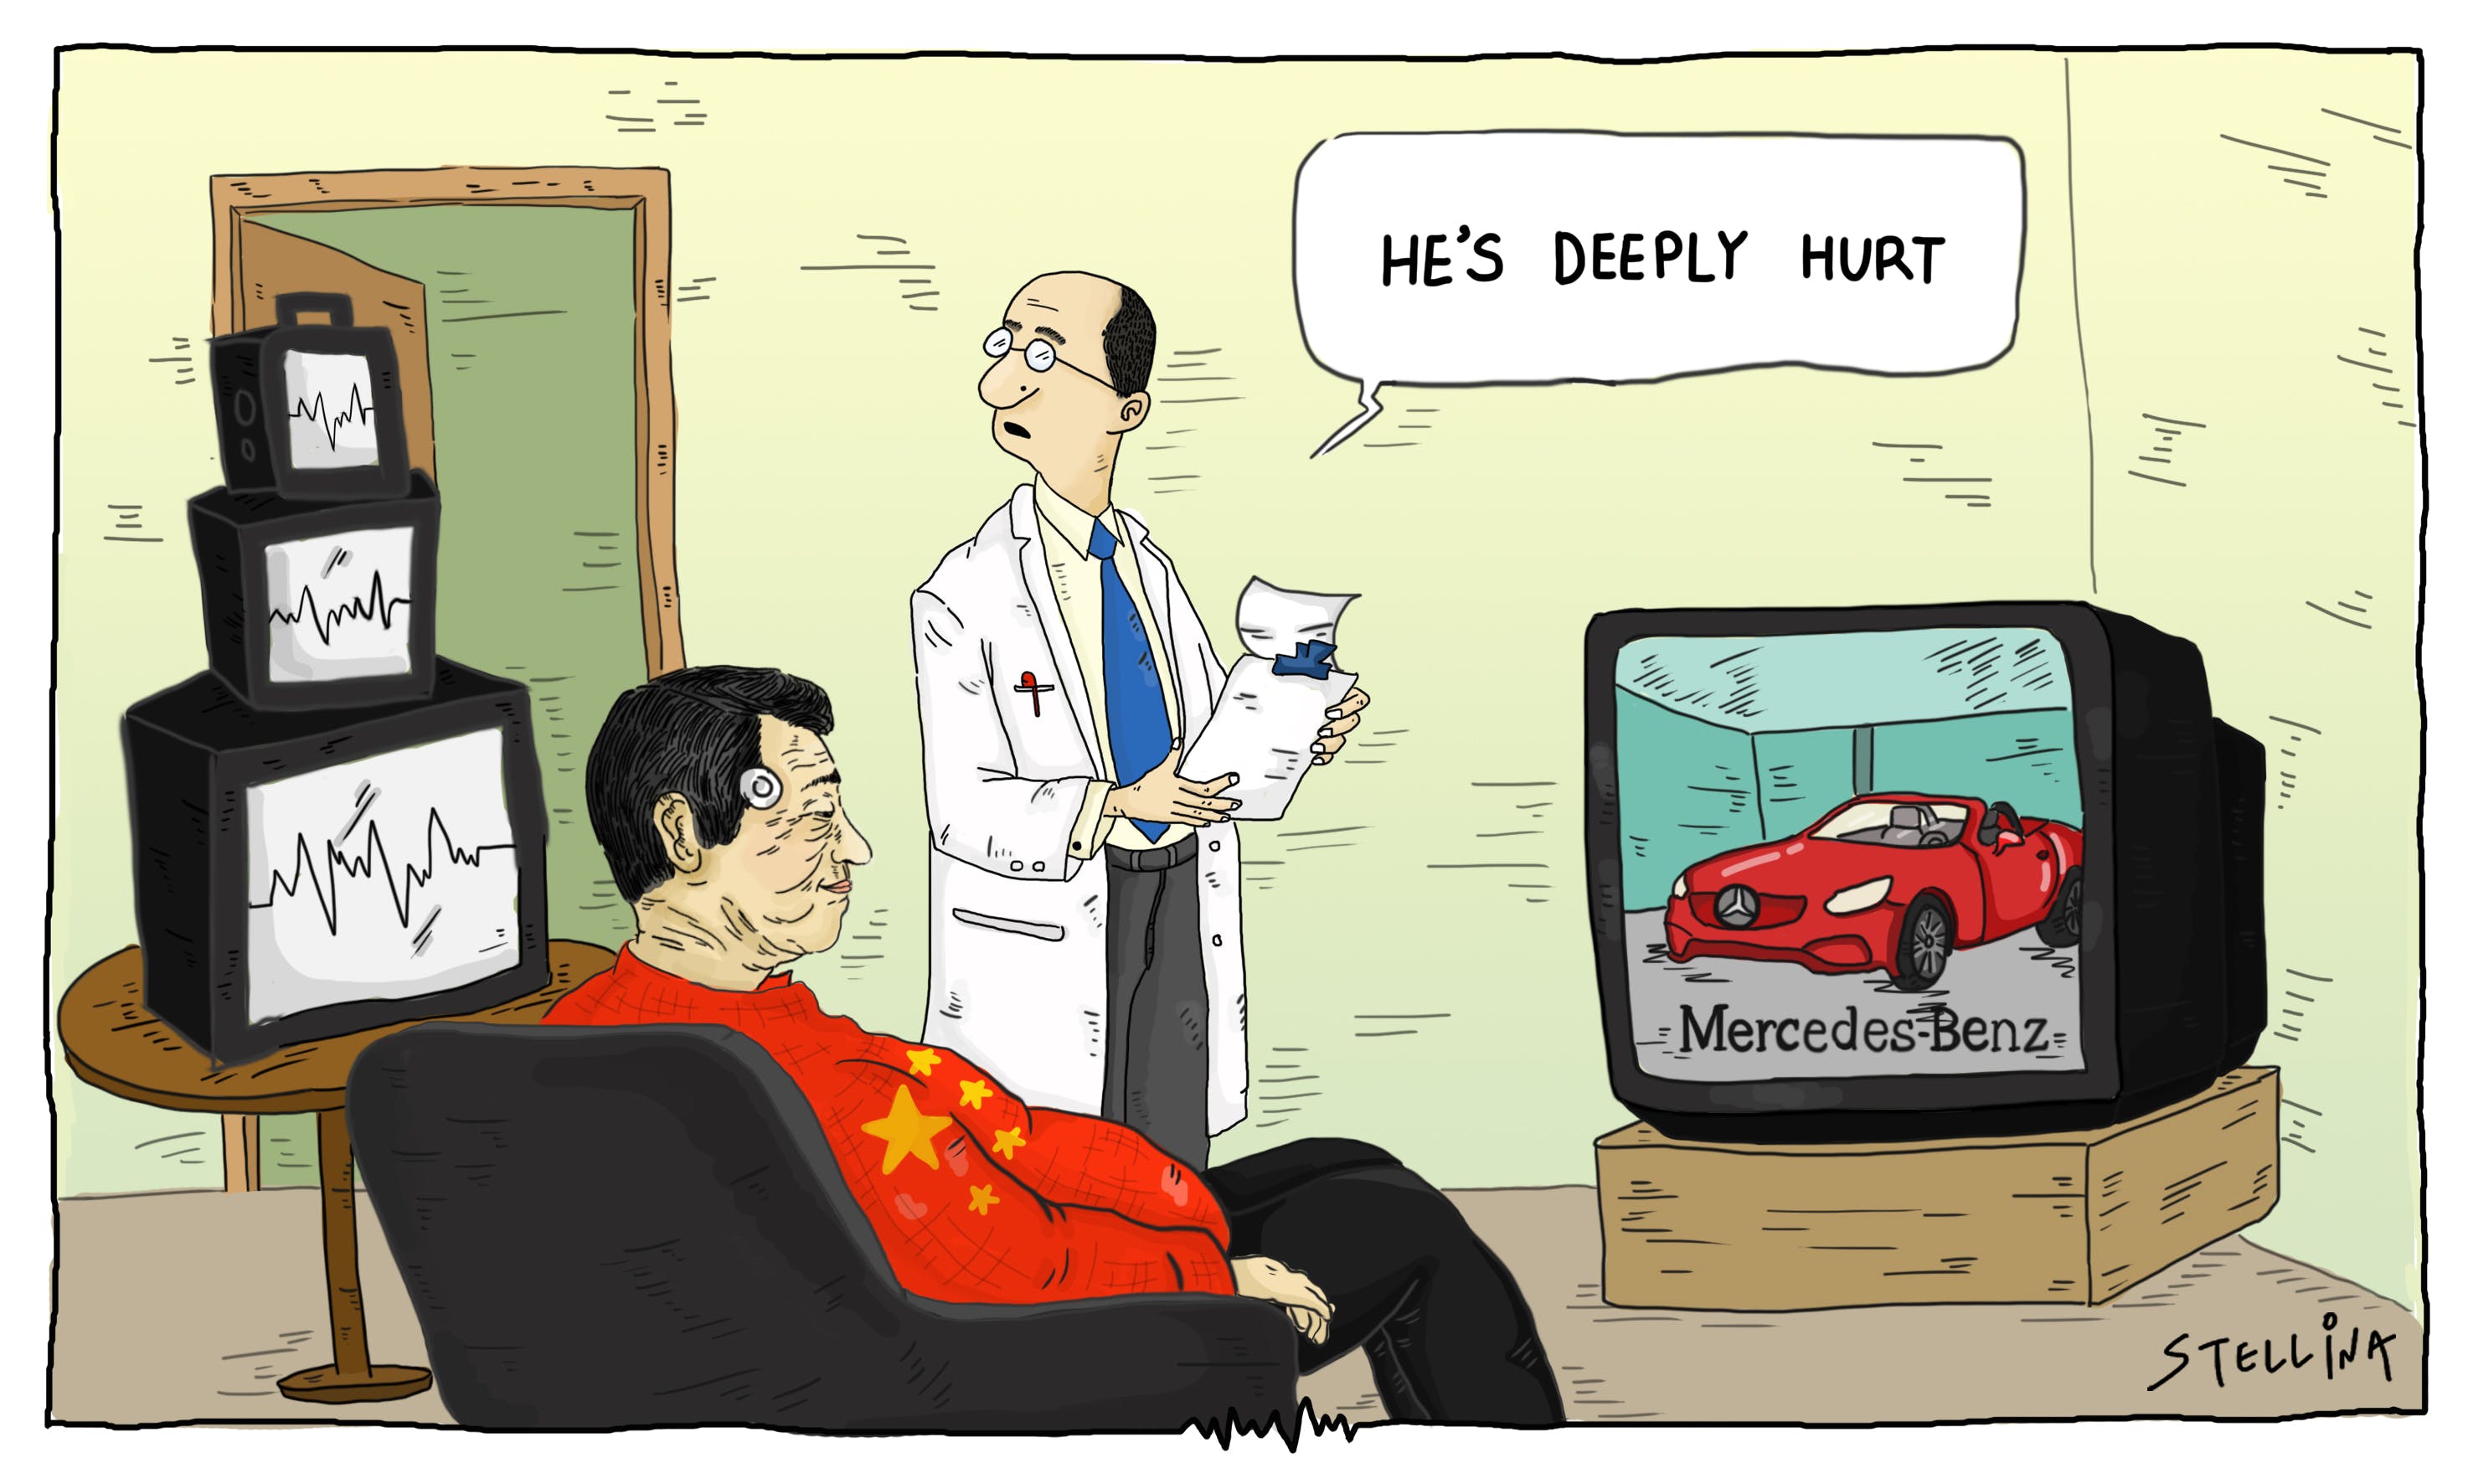 CARTOON: China Offended Yet Again